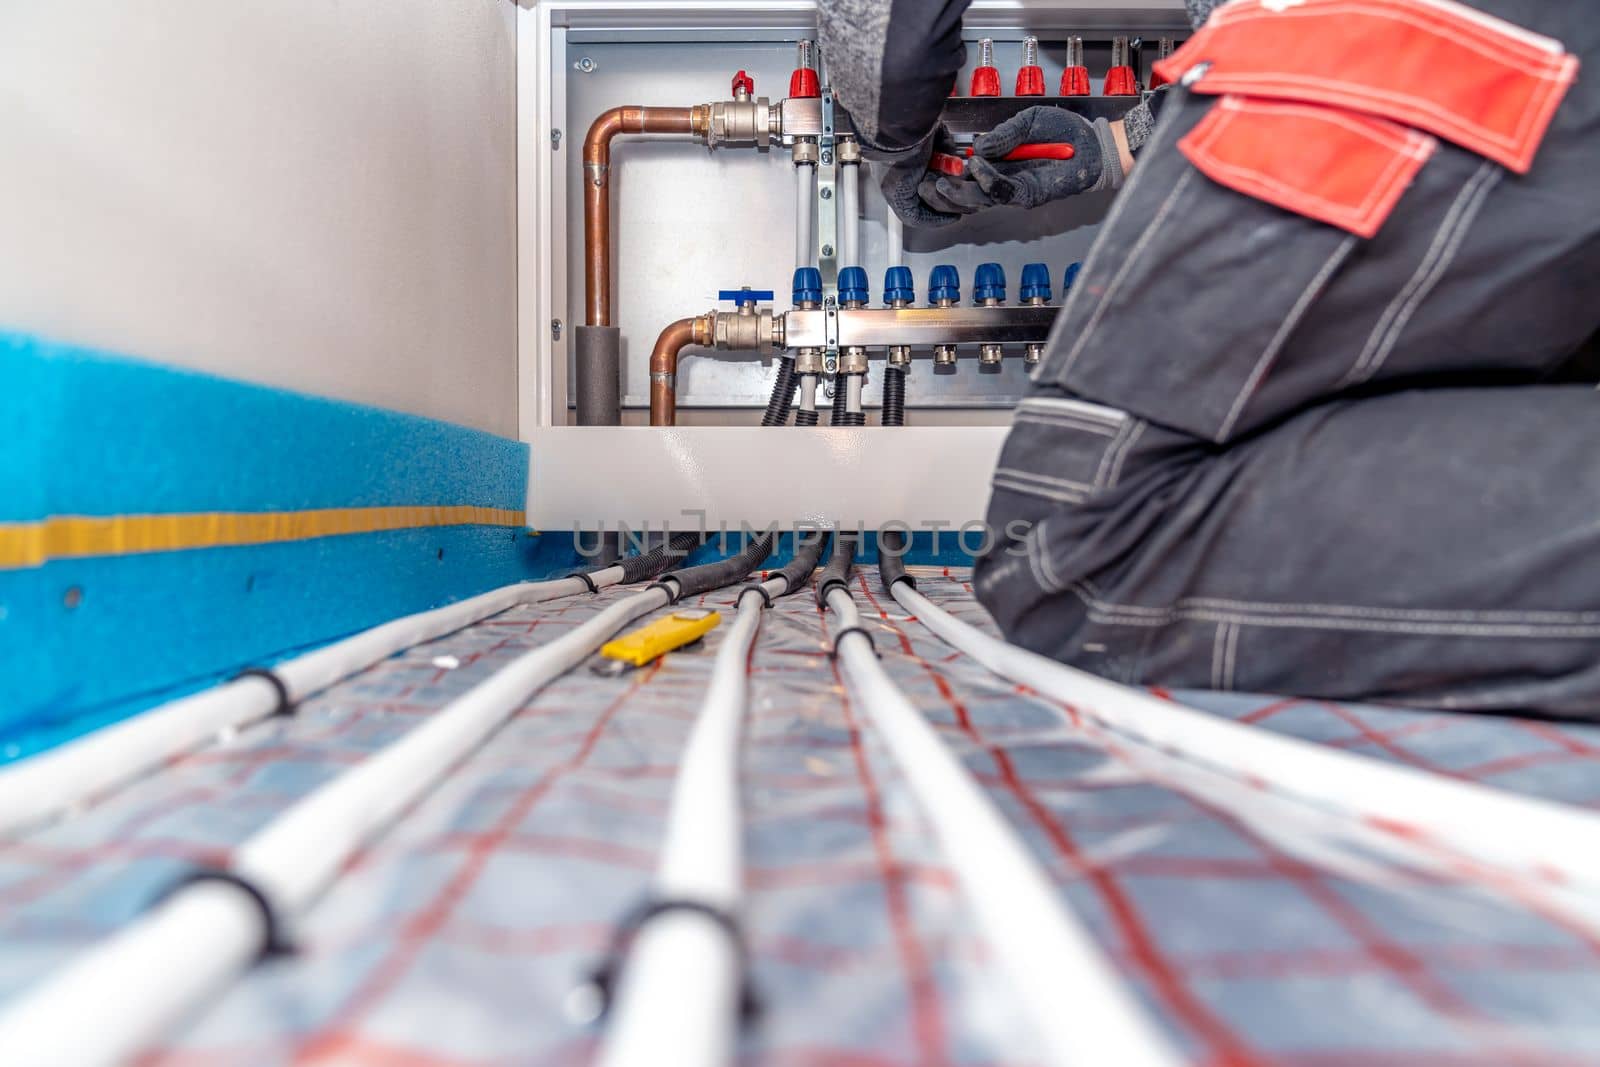 connecting the floor heating to the switchboard by Edophoto